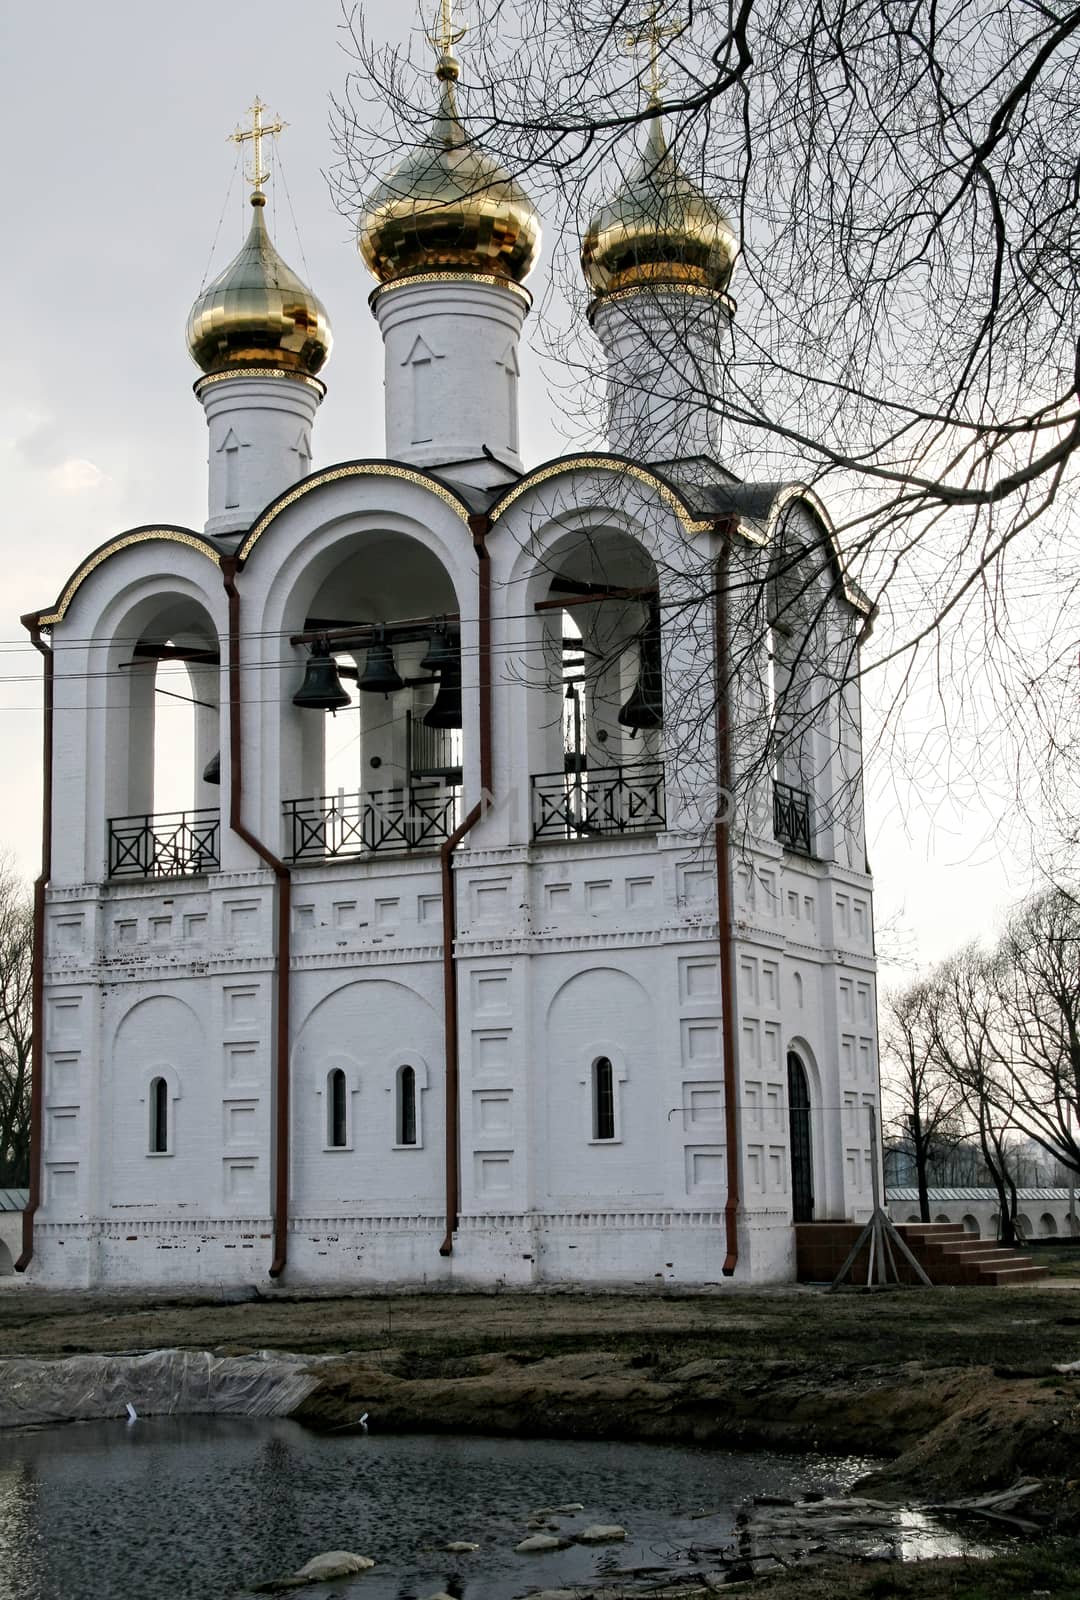 White orthodox church with a golden dome on a background of tree branches in early spring